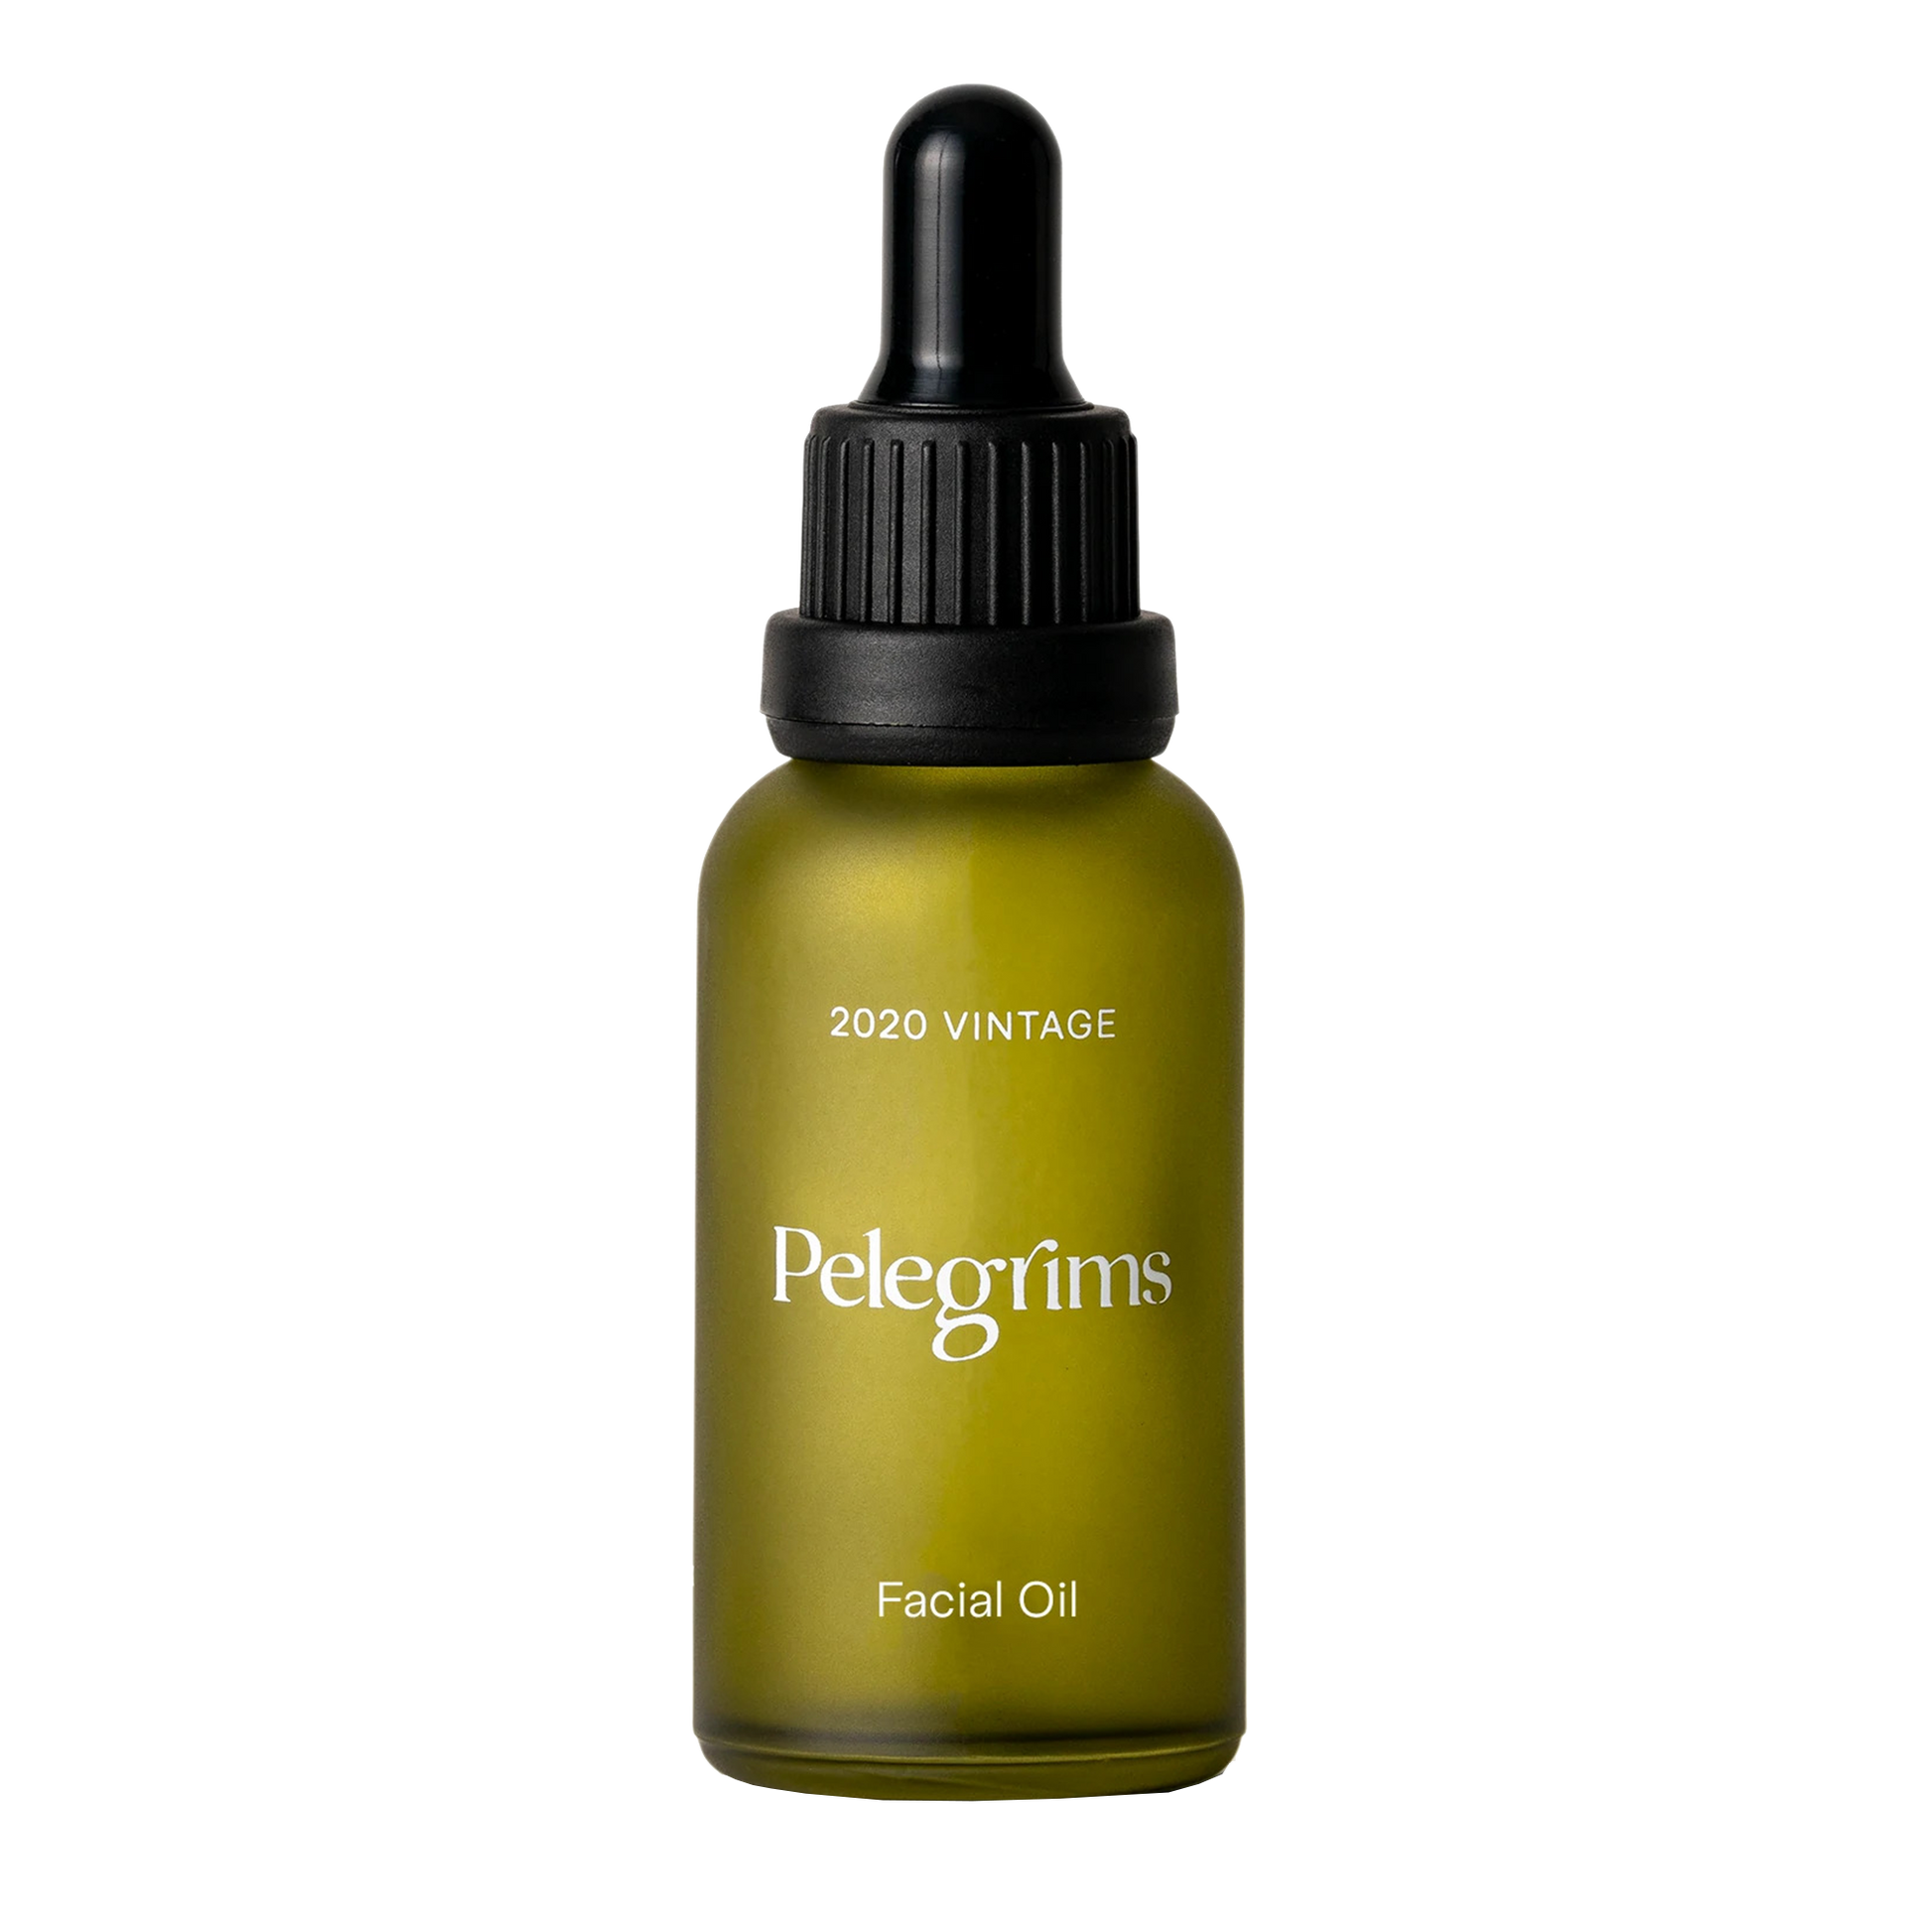 Pelegrims Hyaluronic Plump Facial Oil: Fast acting, fast absorbing facial oil with Polyphenols from our Pinot Noir Grape Extract blended with four highly potent seed oils. They contain vitamins, some UV protection and cell renewing properties that work quickly to reduce redness and give the skin a healthy glow. Subtly scented with Fig, Grass and Rose.